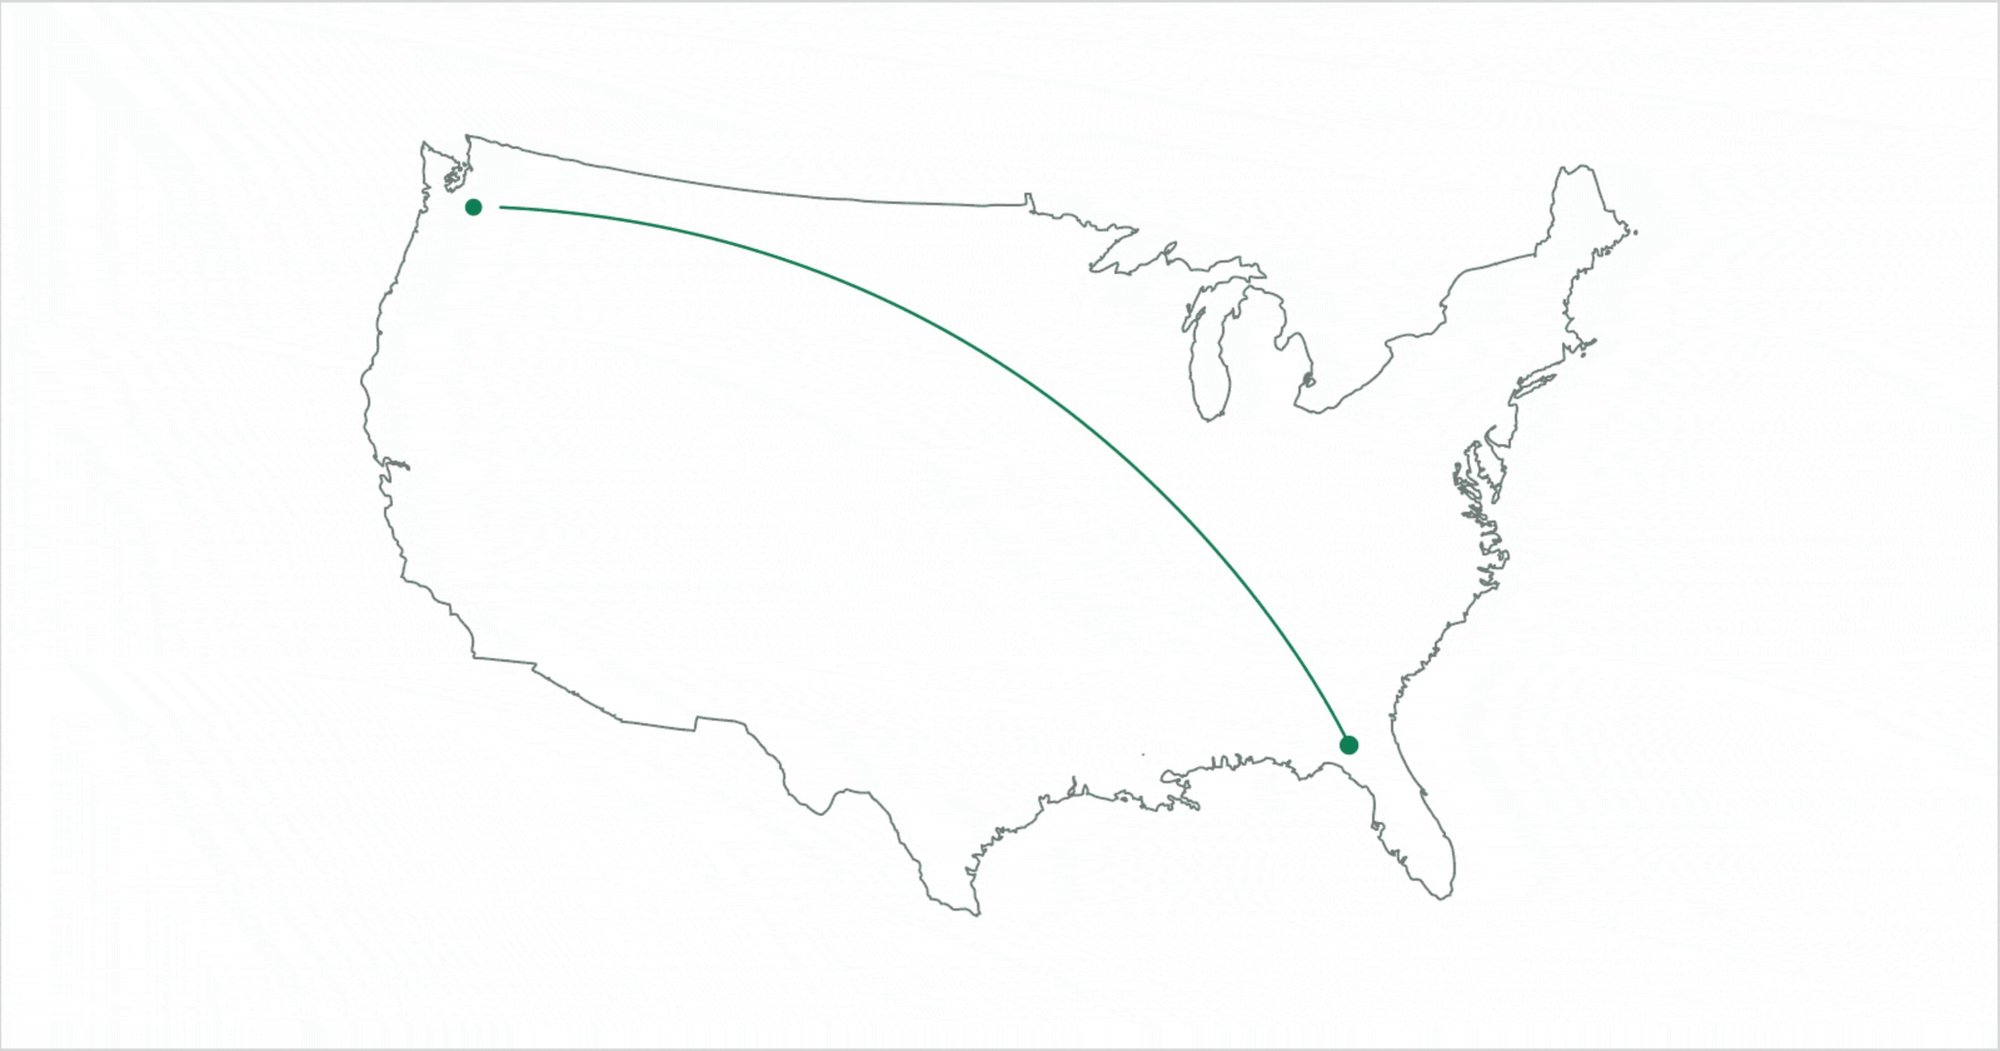 Outline of the United States of America with Arrow Moving Across States